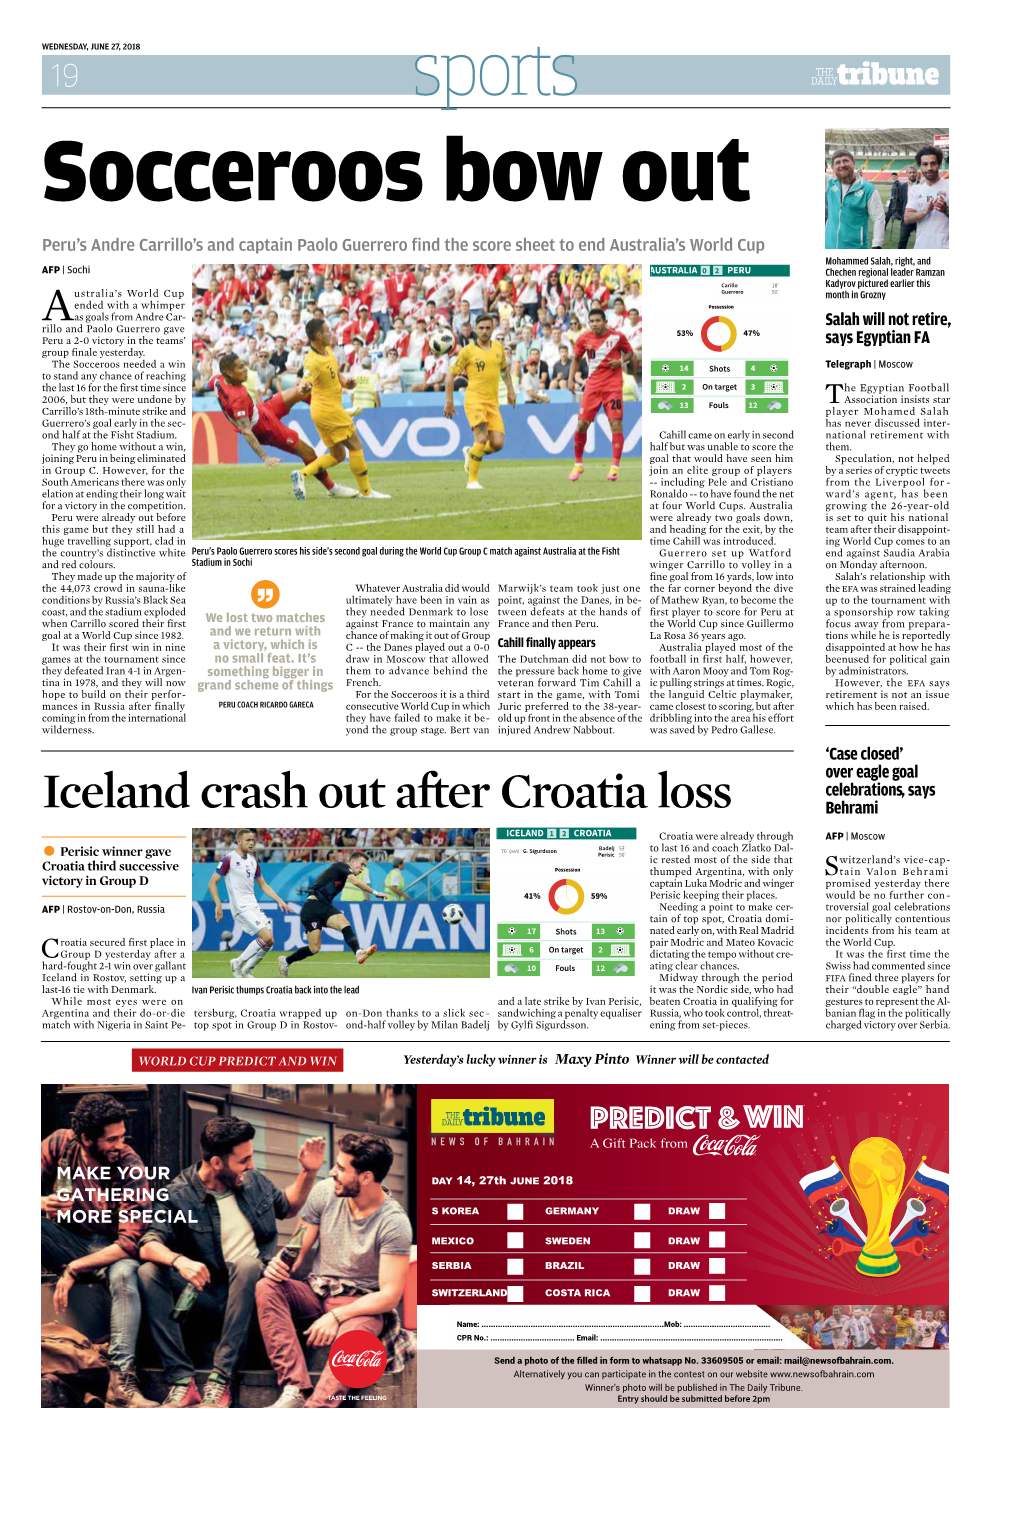 Iceland Crash out After Croatia Loss